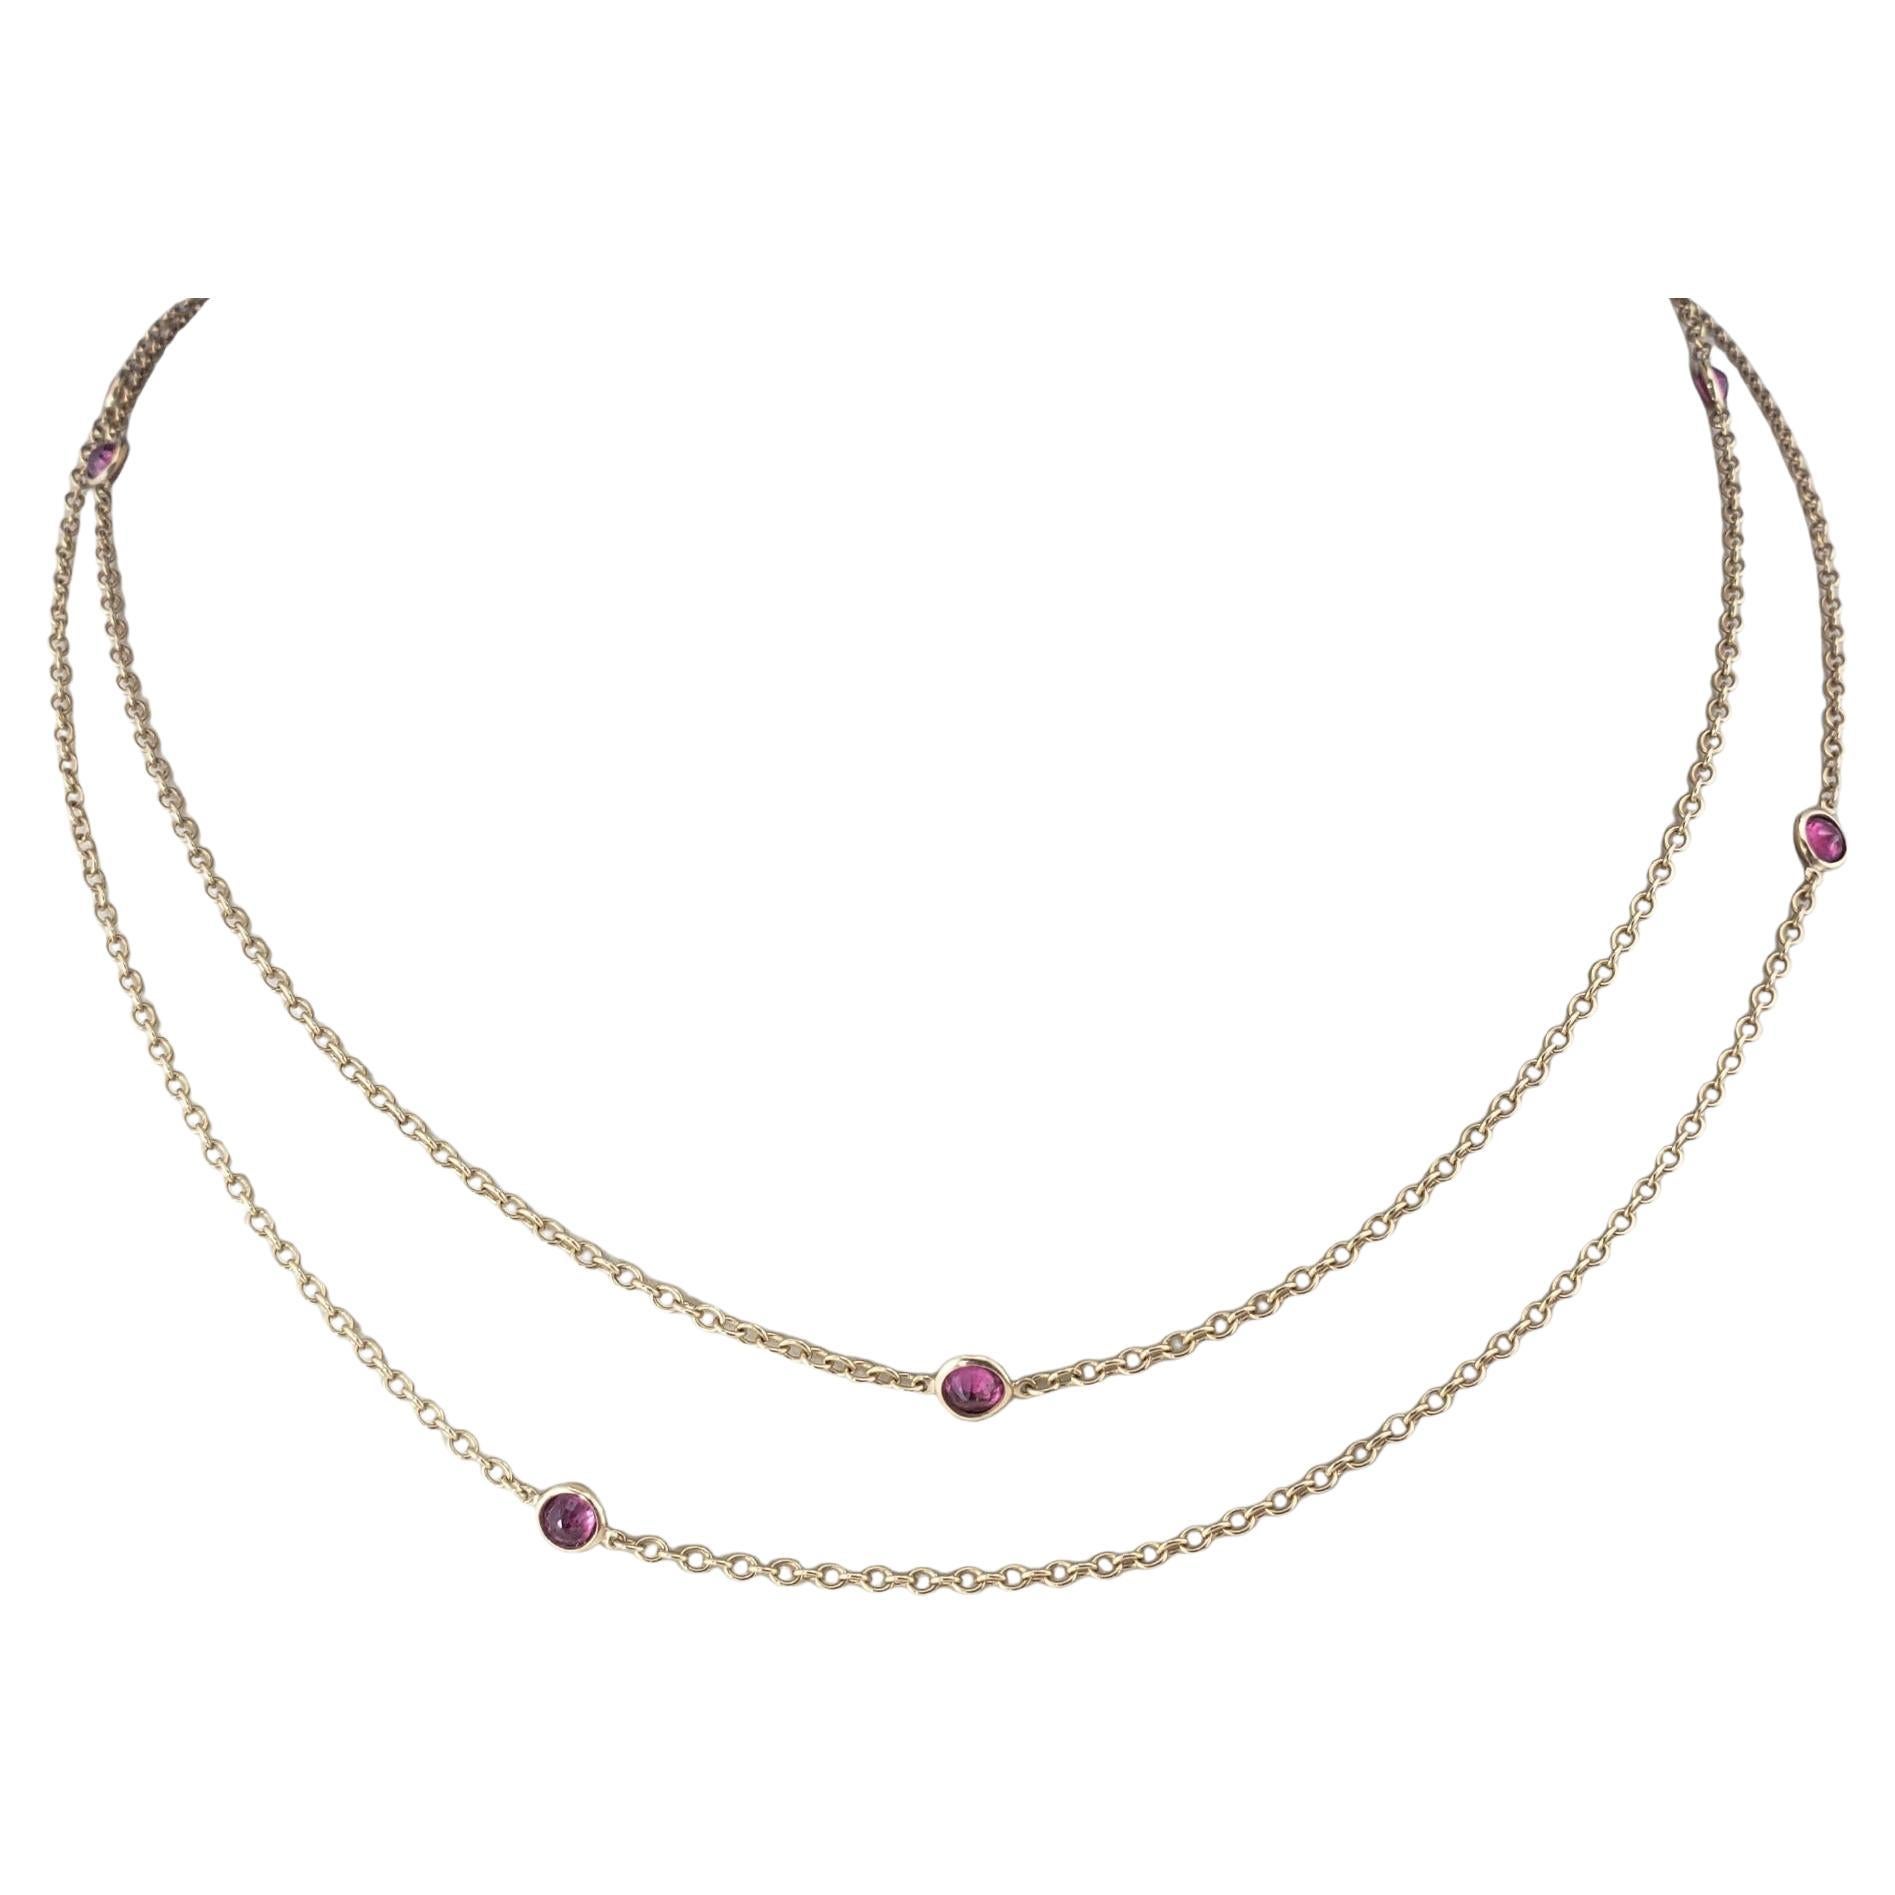 Tiffany & Co. 18K Gold Elsa Peretti Color by the Yard Ruby Necklace #17225 For Sale